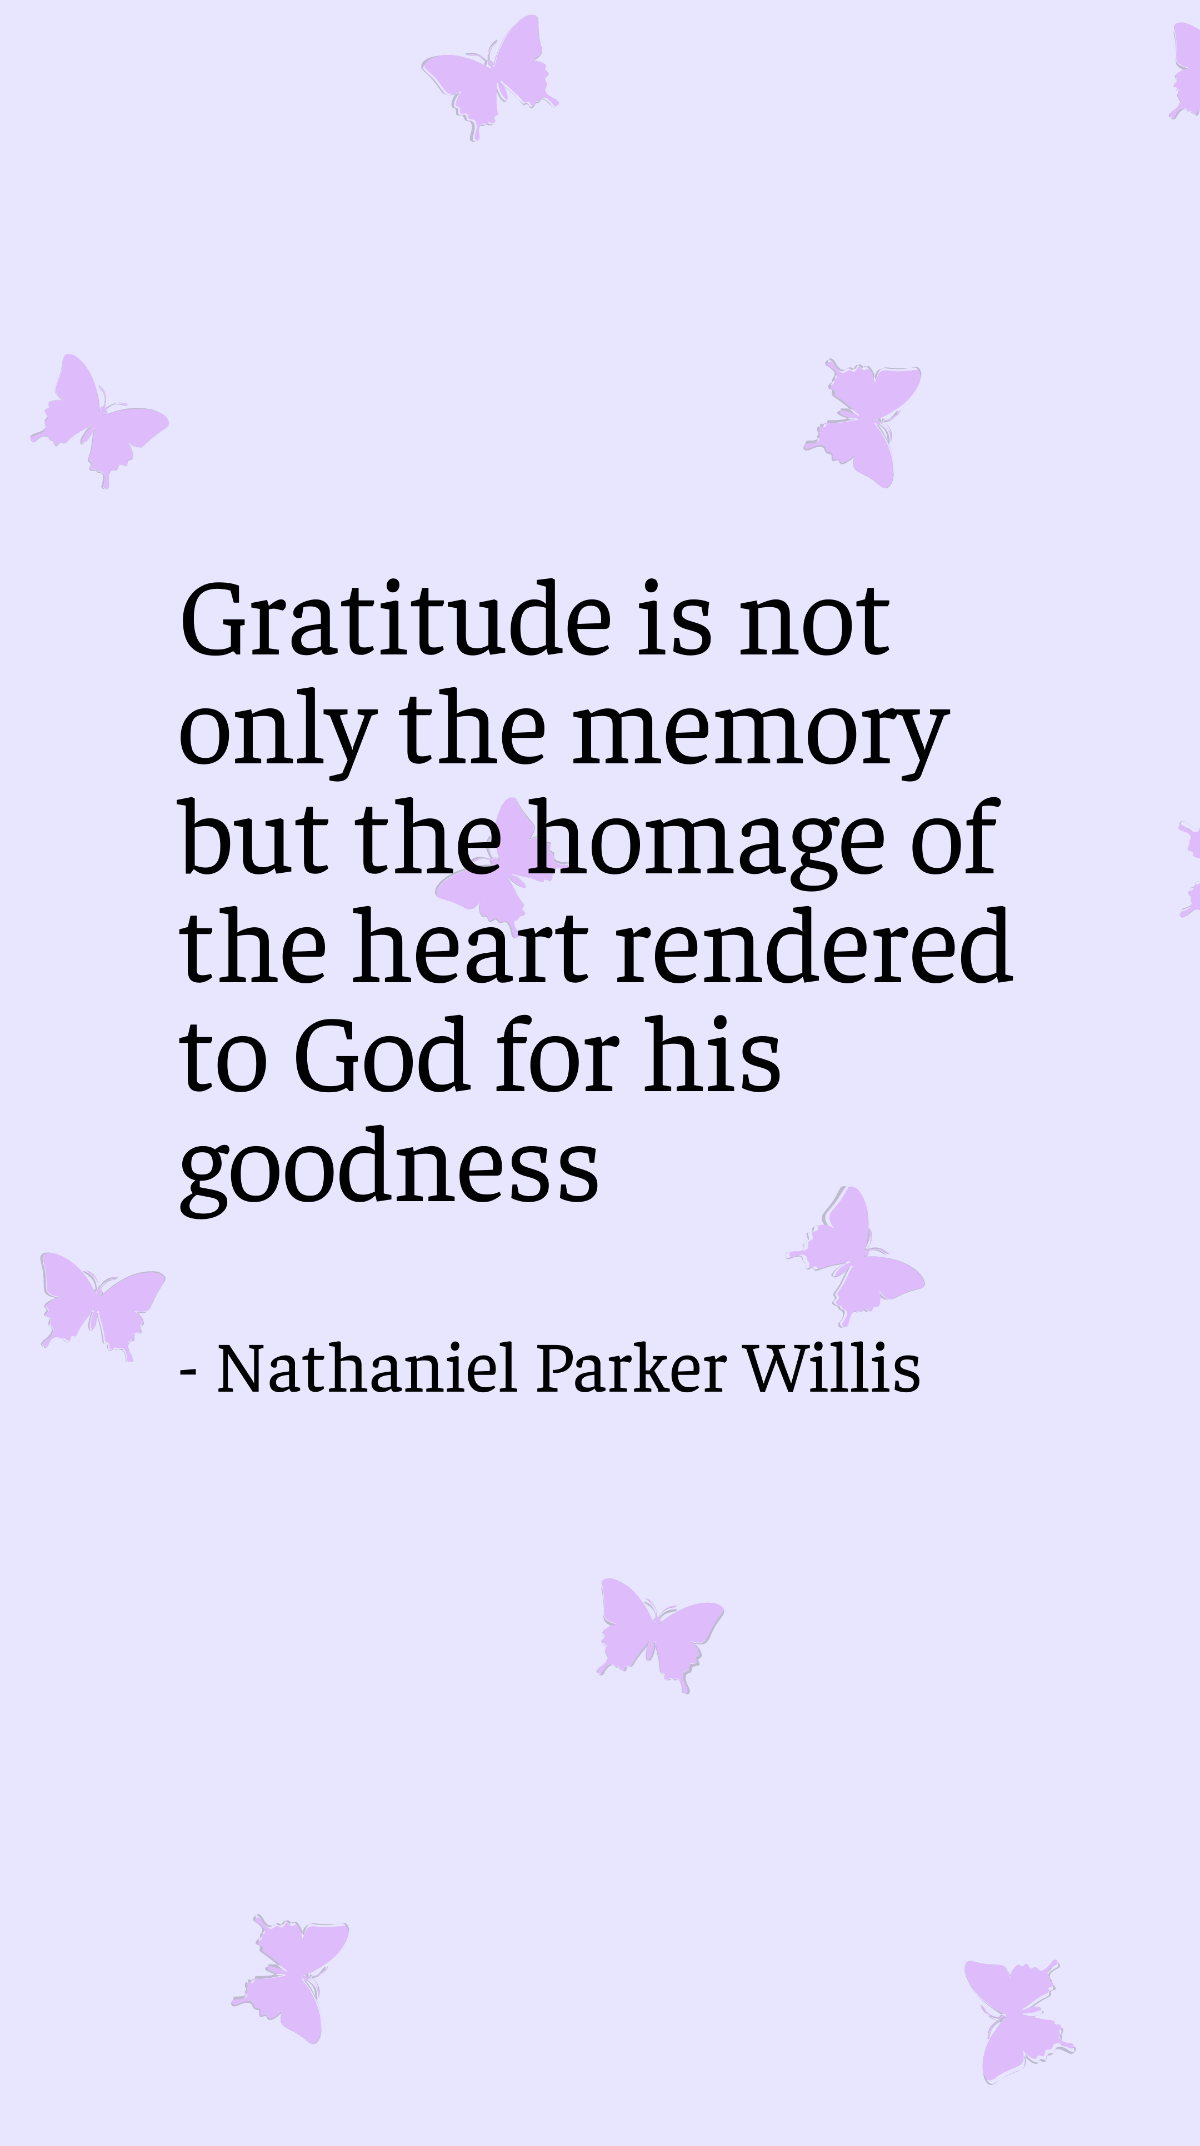 Free Nathaniel Parker Willis - Gratitude is not only the memory but the homage of the heart rendered to God for his goodness Template